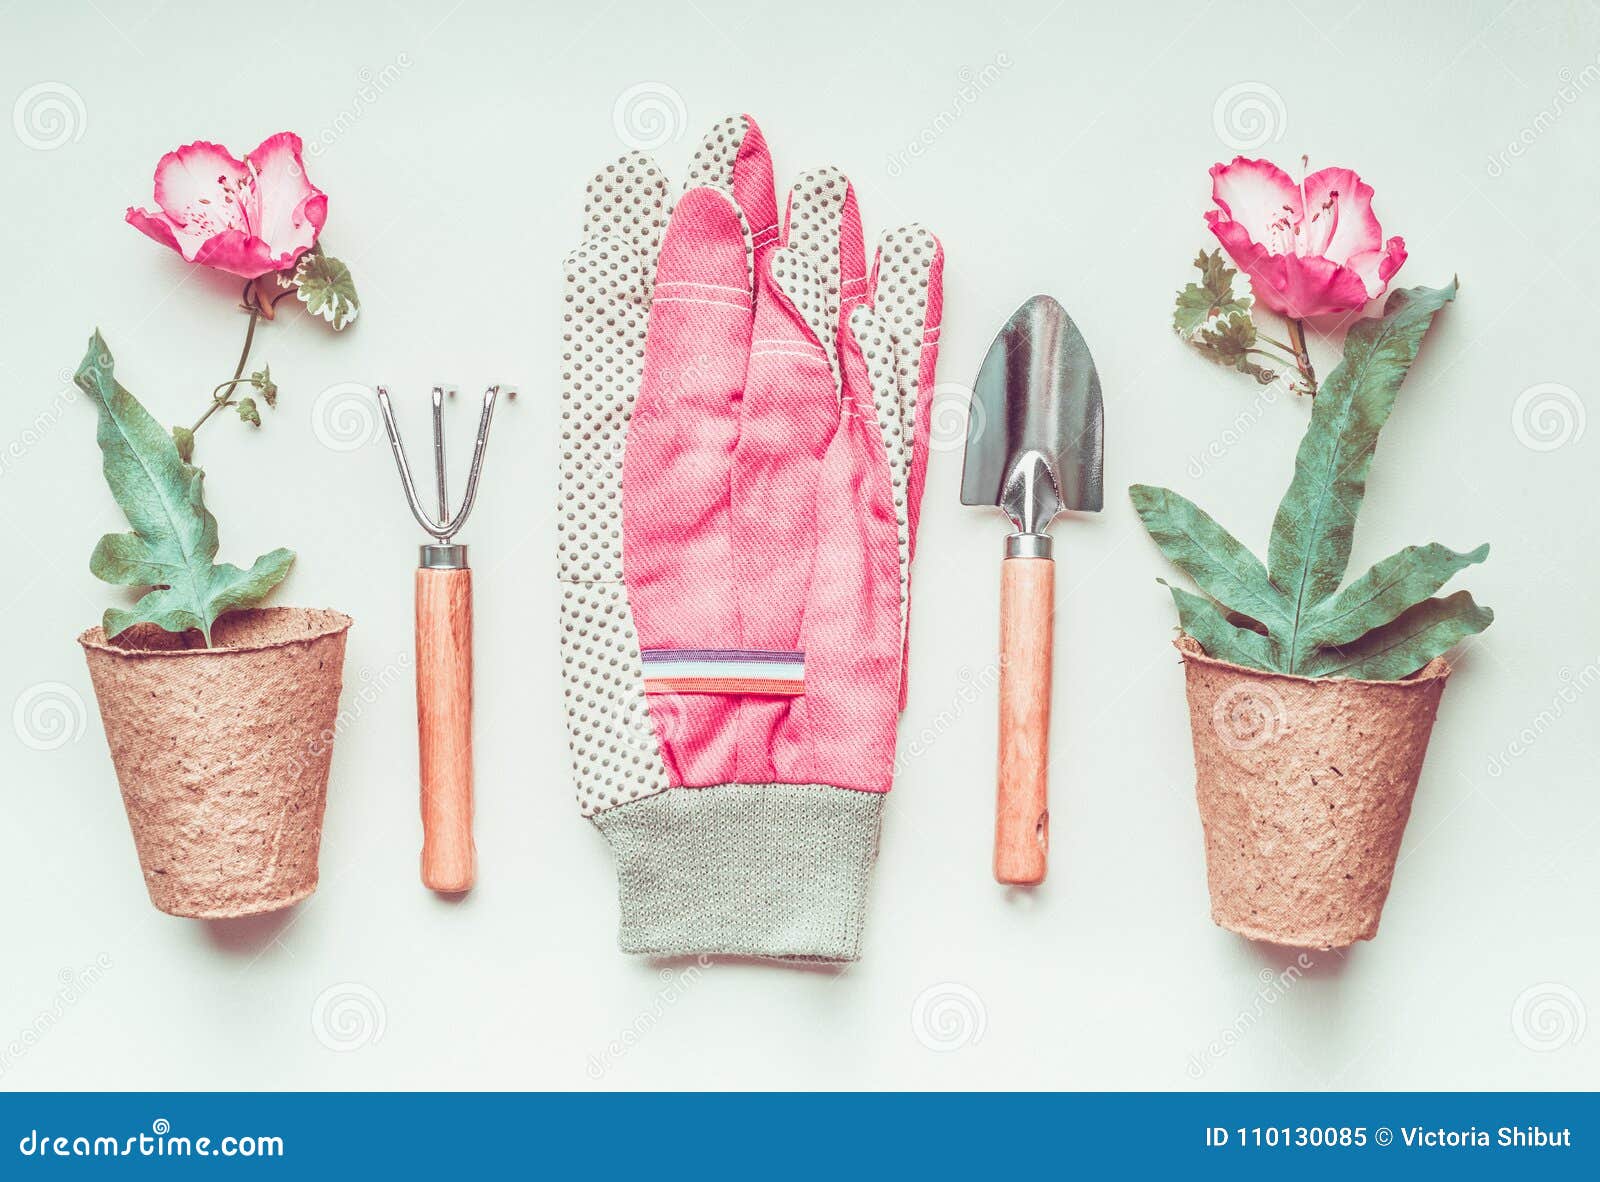 Gardening Tools Set Layout With Plant Flowers Pot And Pink Gloves